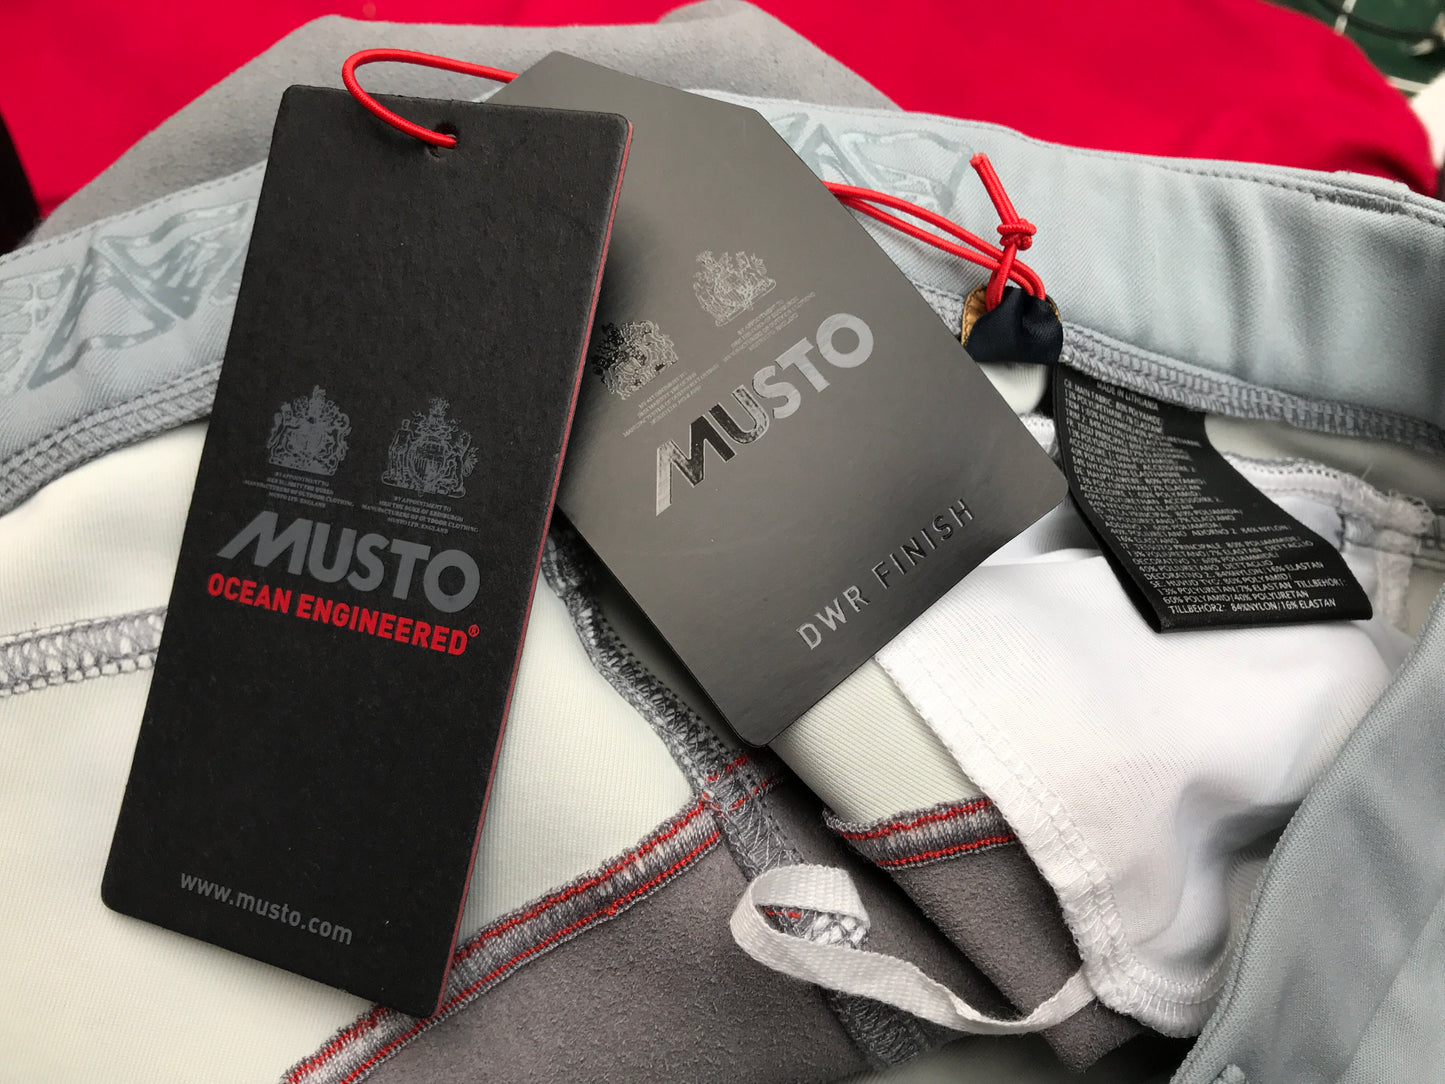 NEW Musto breeches size 16 (34)FREE POSTAGE